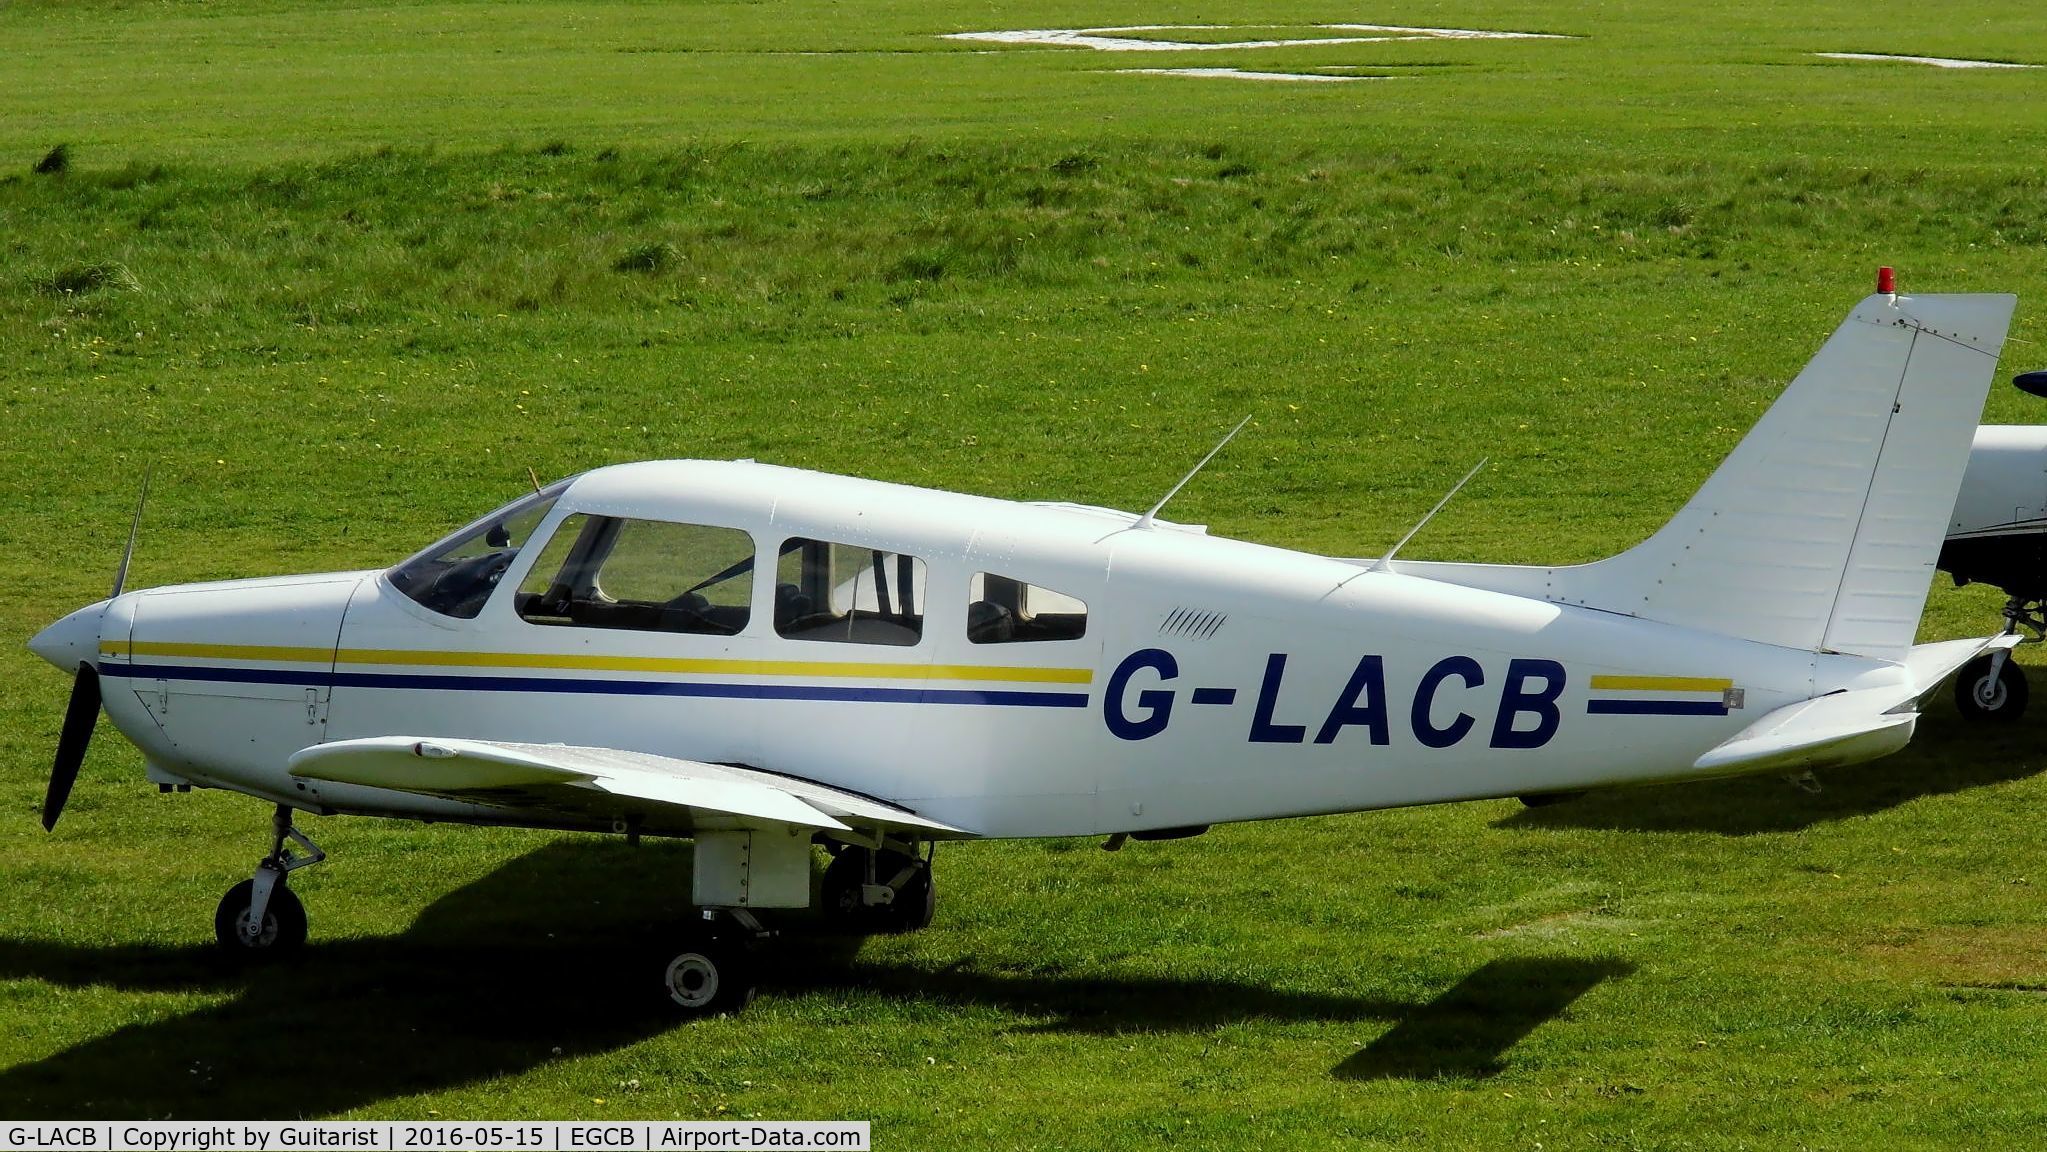 G-LACB, 1982 Piper PA-28-161 Cherokee C/N 28-8216035, City Airport Manchester